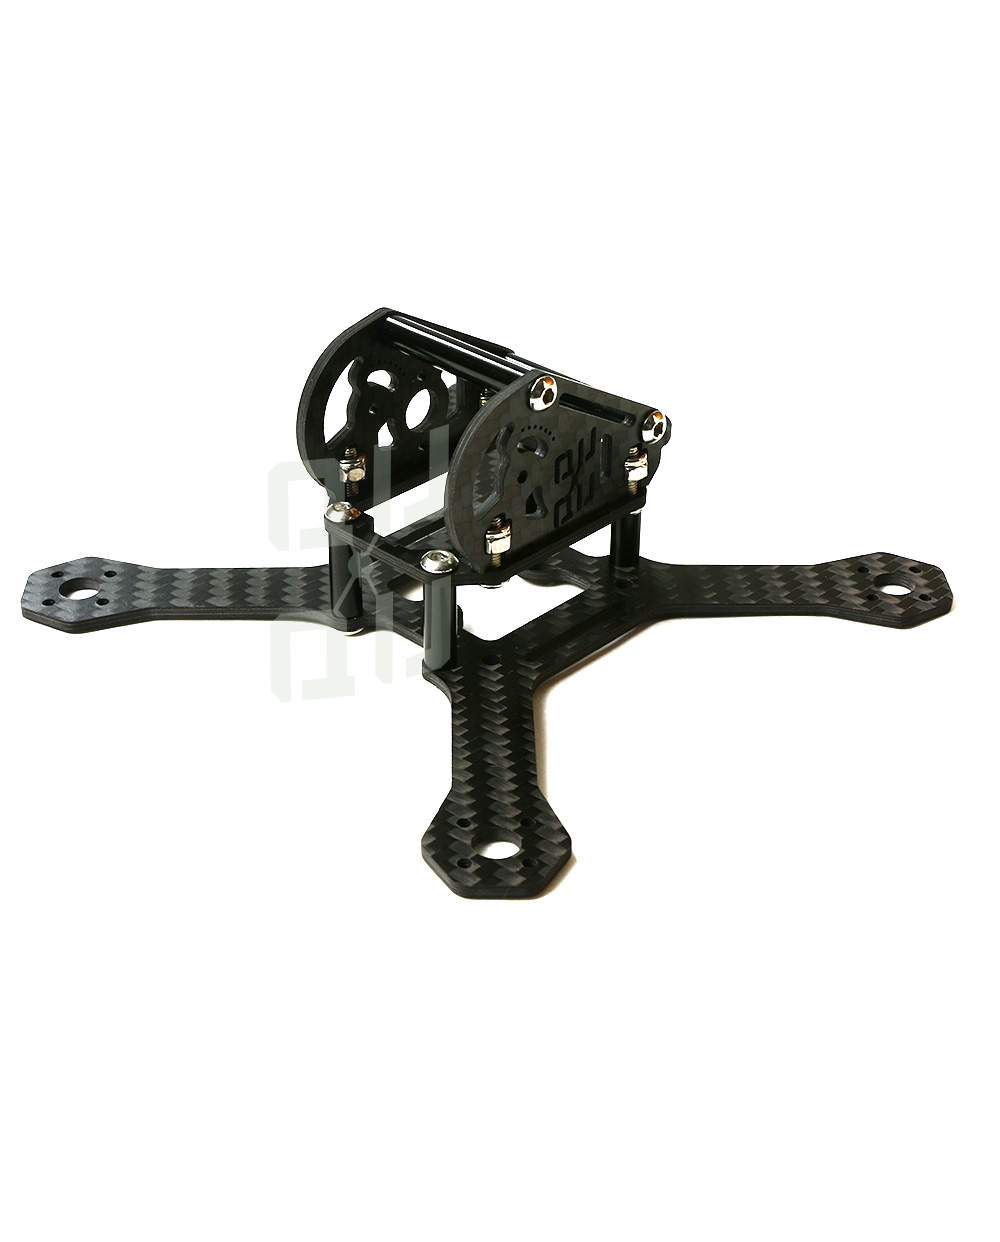 qq130 fully built 3" Racing Drone frame by QuadQuestions front left view.